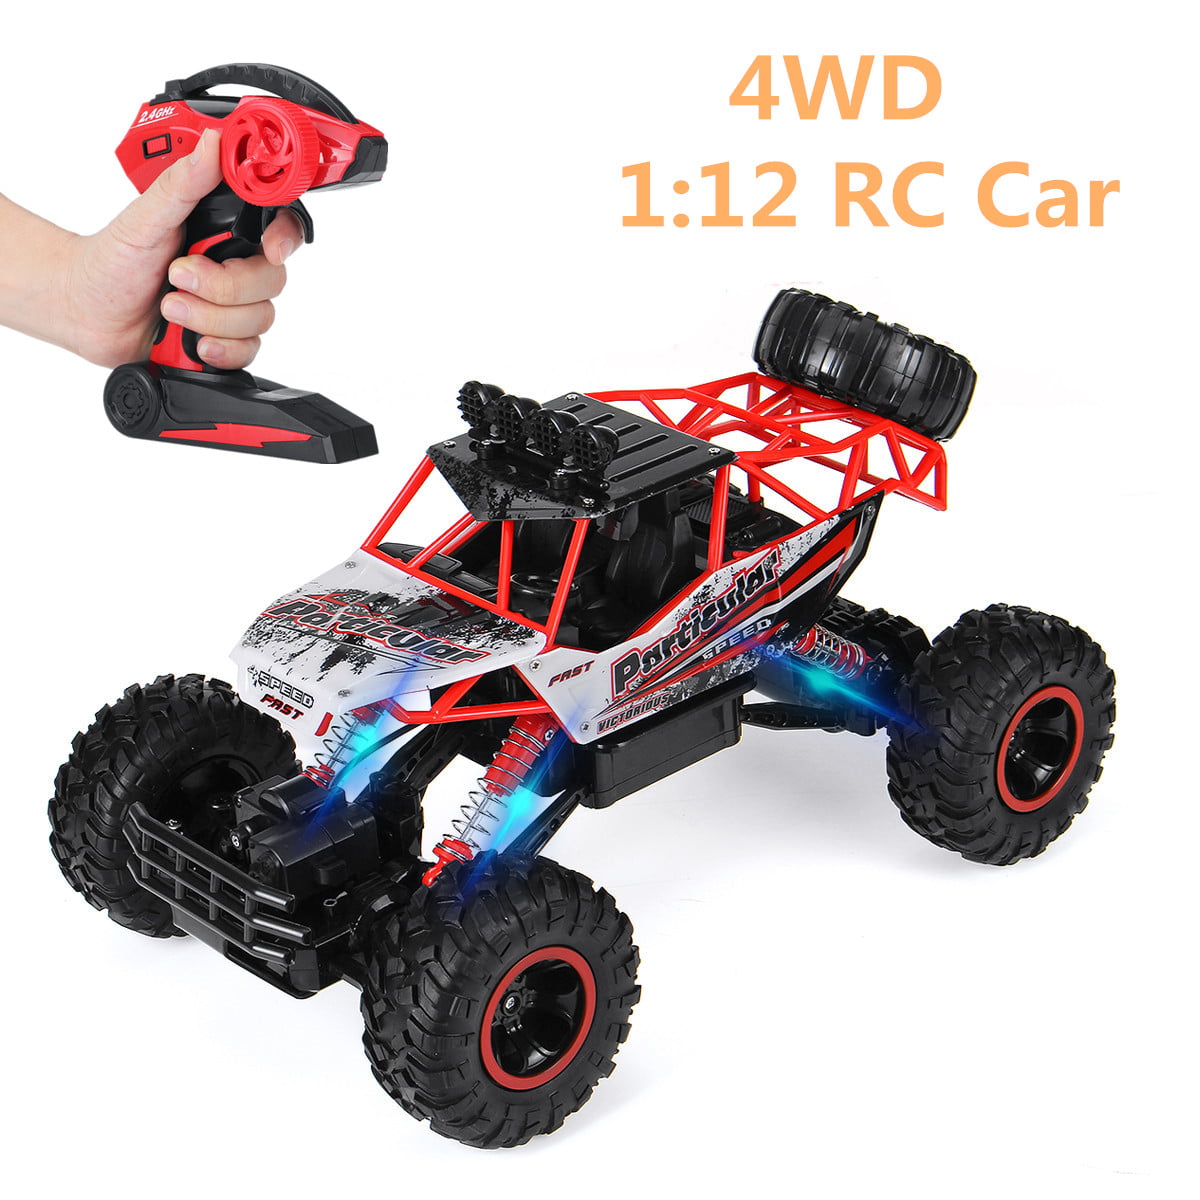 Details about   1:12 4WD RC Car Updated Version 2.4G Radio Control RC Car Toys  remote control 